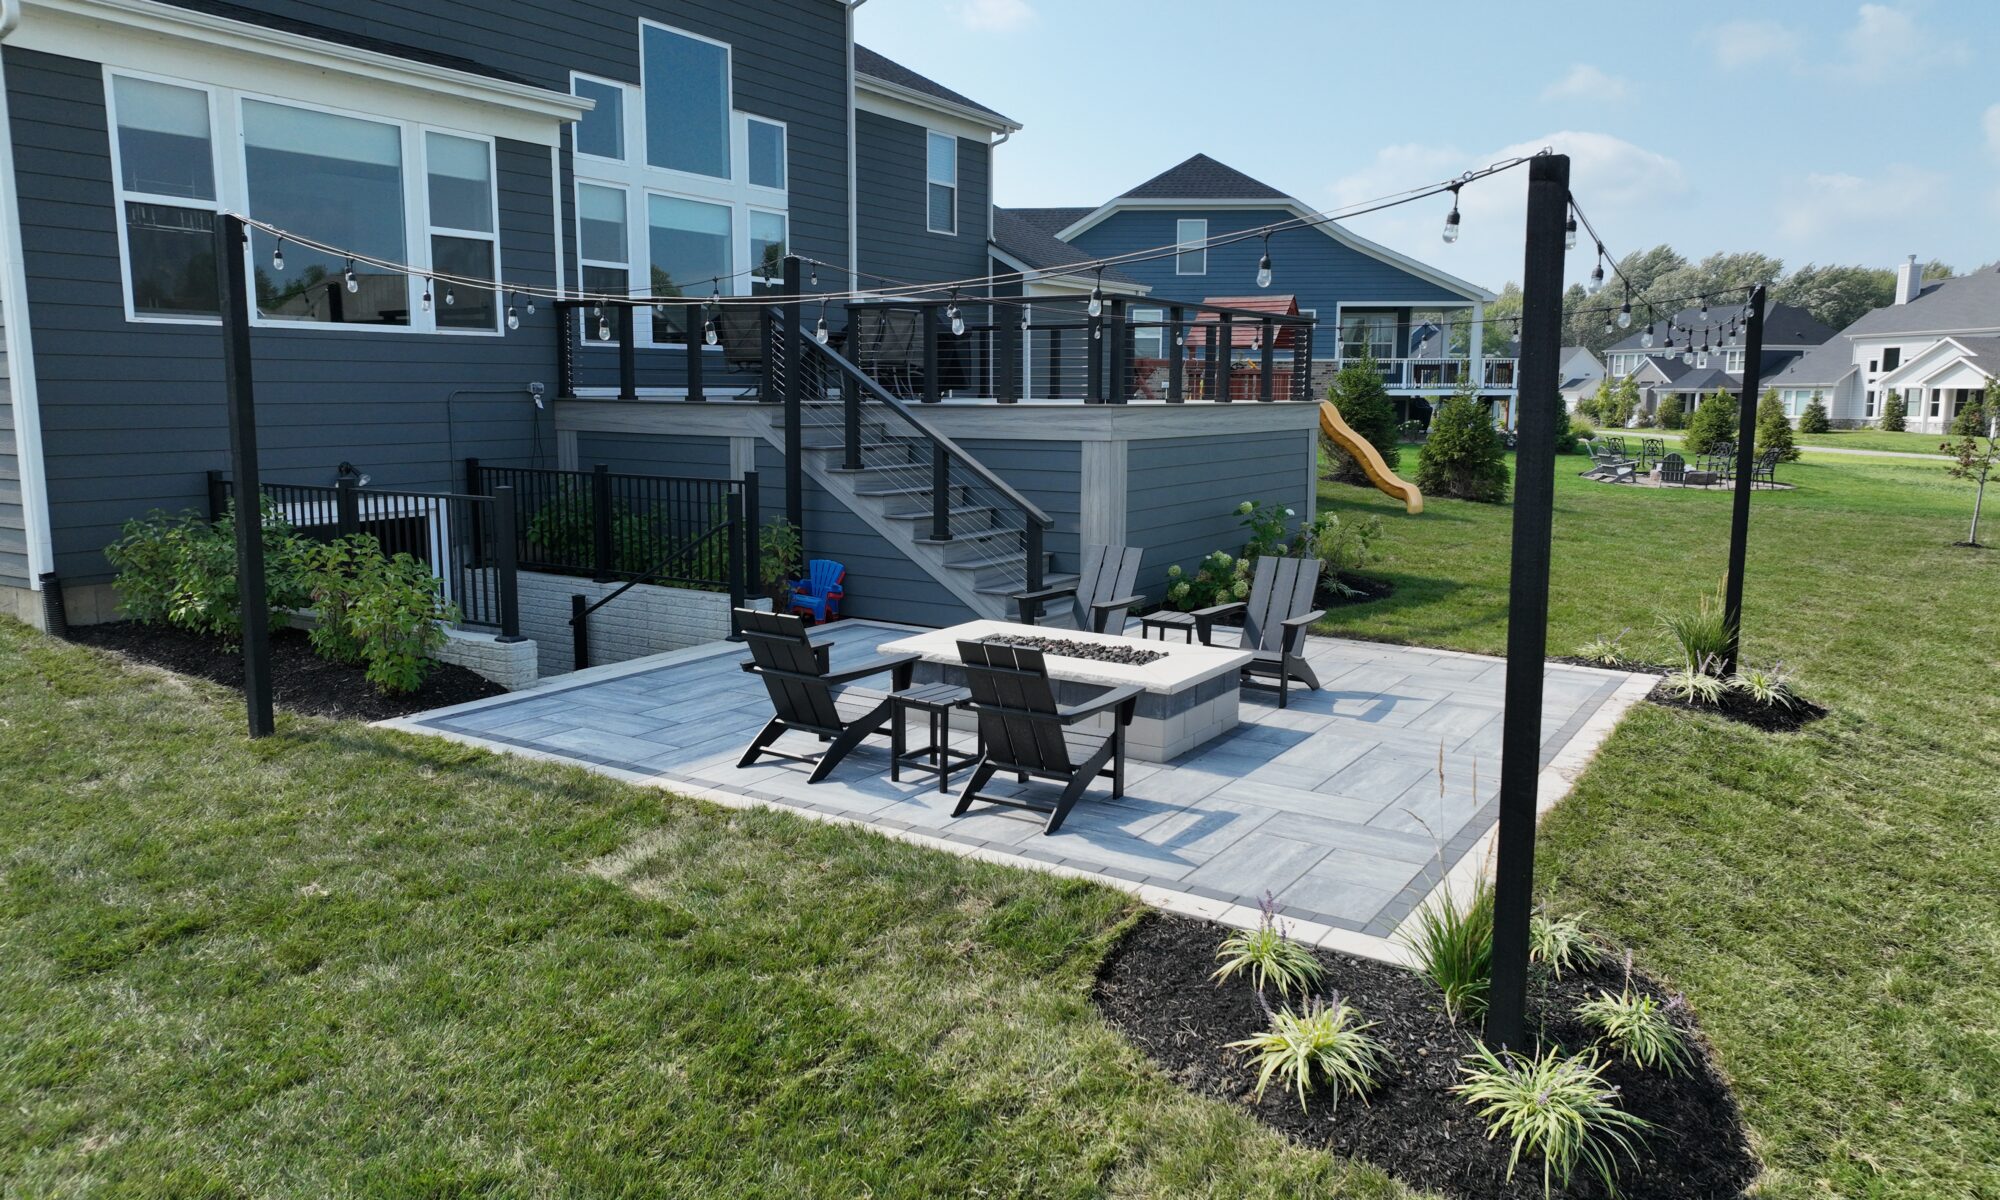 Chatham Elevated Deck Precision Outdoors Deckorators Decking Westfield Indiana Custom Cable railing composition deck string lighting gas firepit fire pit walk out basement custom landscaping paver patio beautiful backyard entertaining space relaxing space